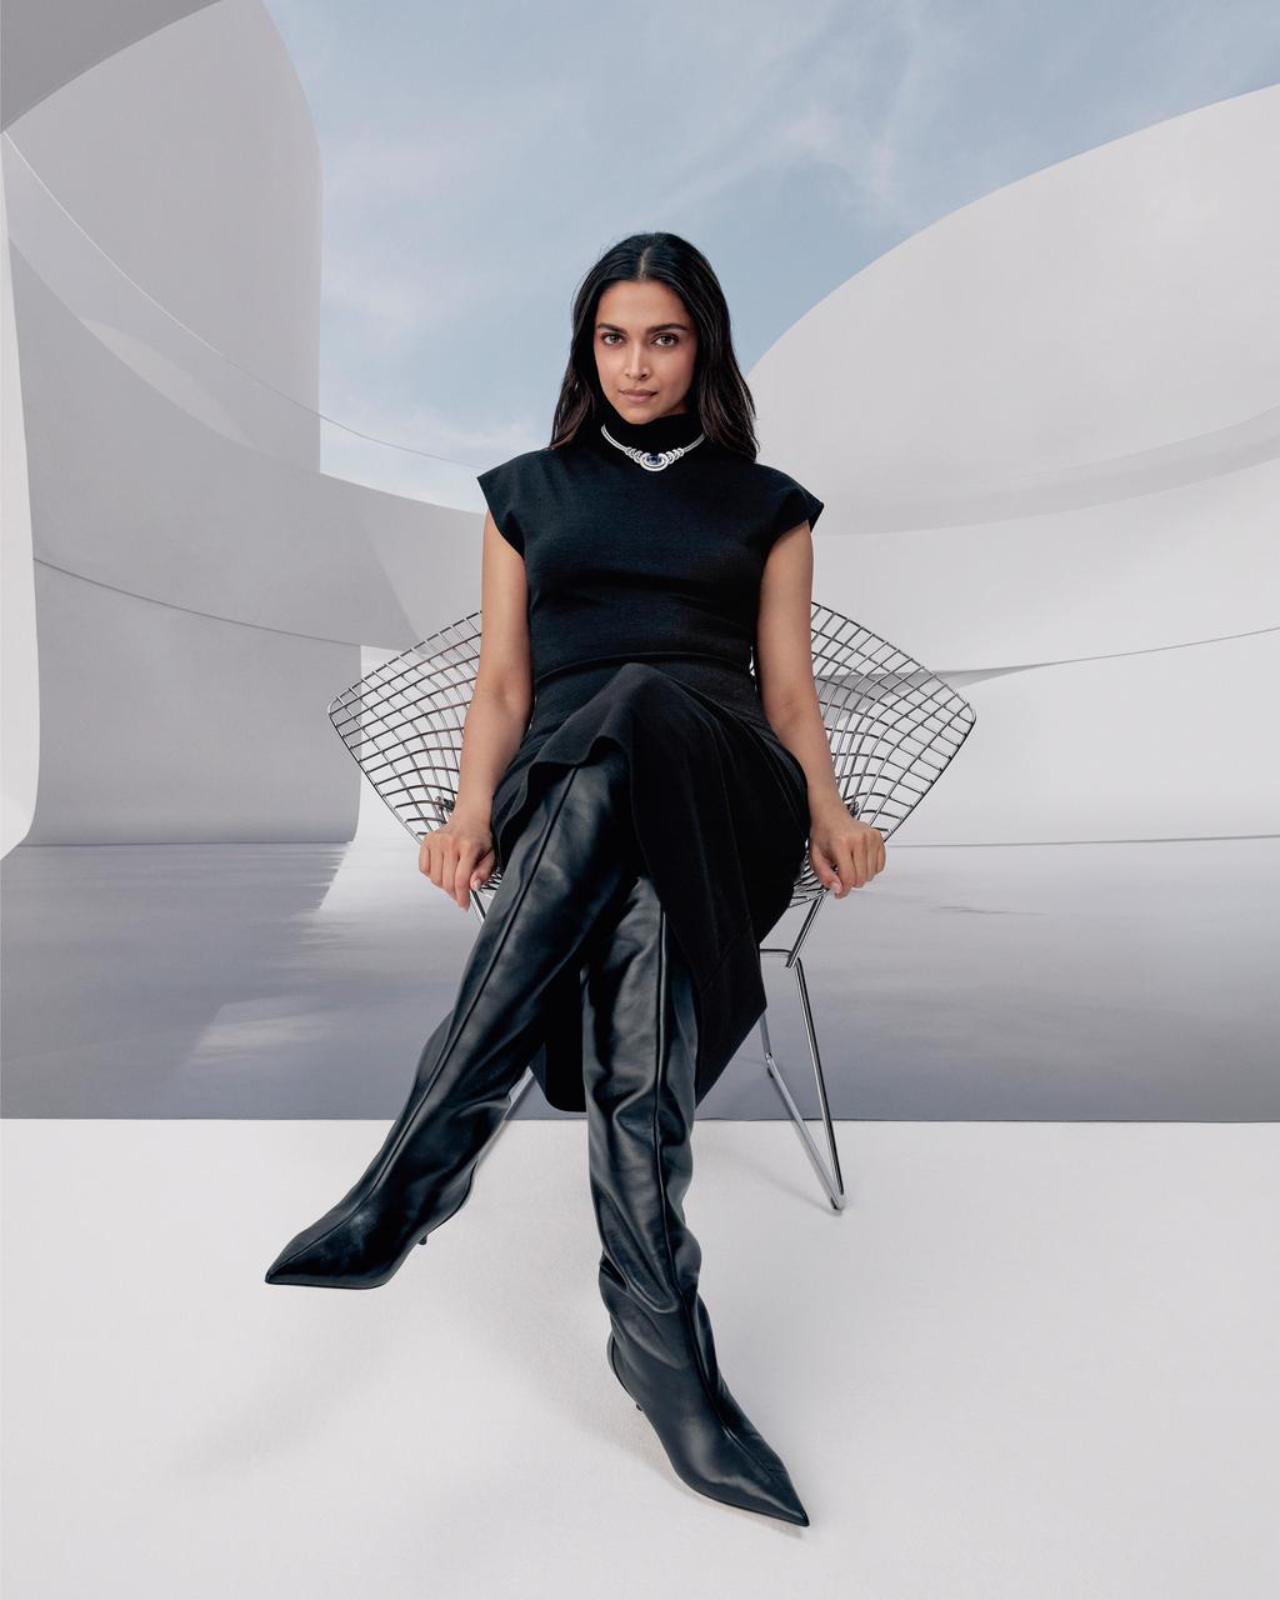 Thigh high boots and an all-black ensemble, Deepika Padukone is giving us boss vibes in this look.